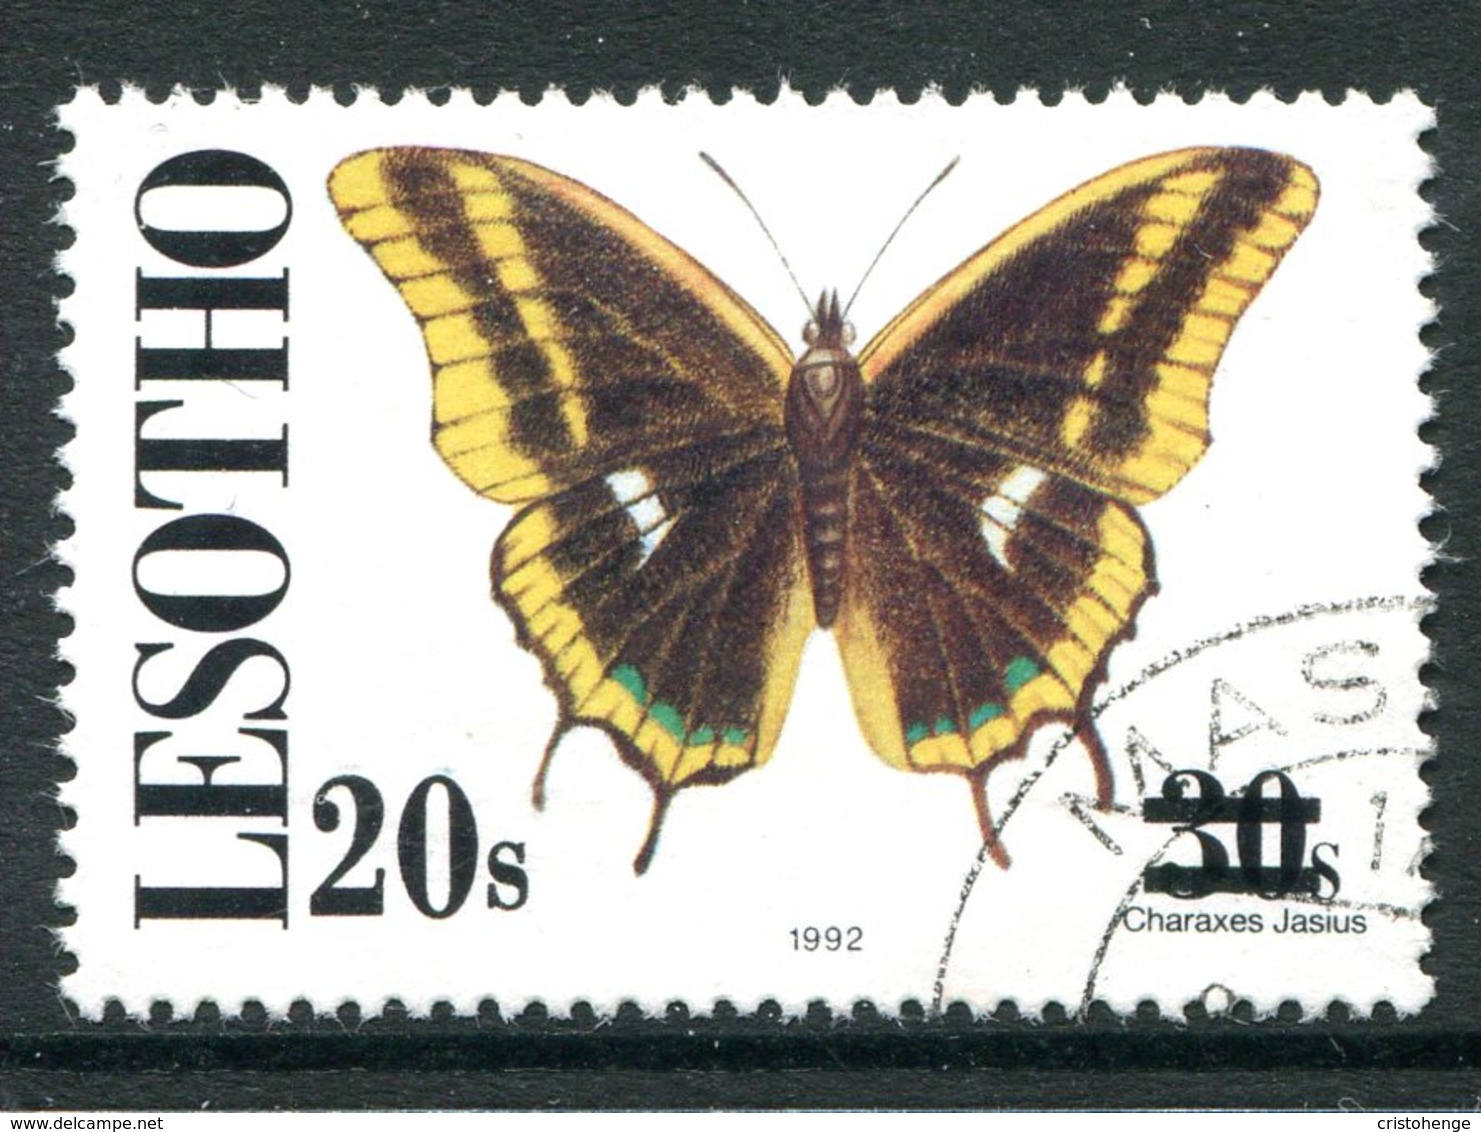 Lesotho 1995 Butterfly Surcharge - 20s On 30s Used (SG 1214) - Lesotho (1966-...)